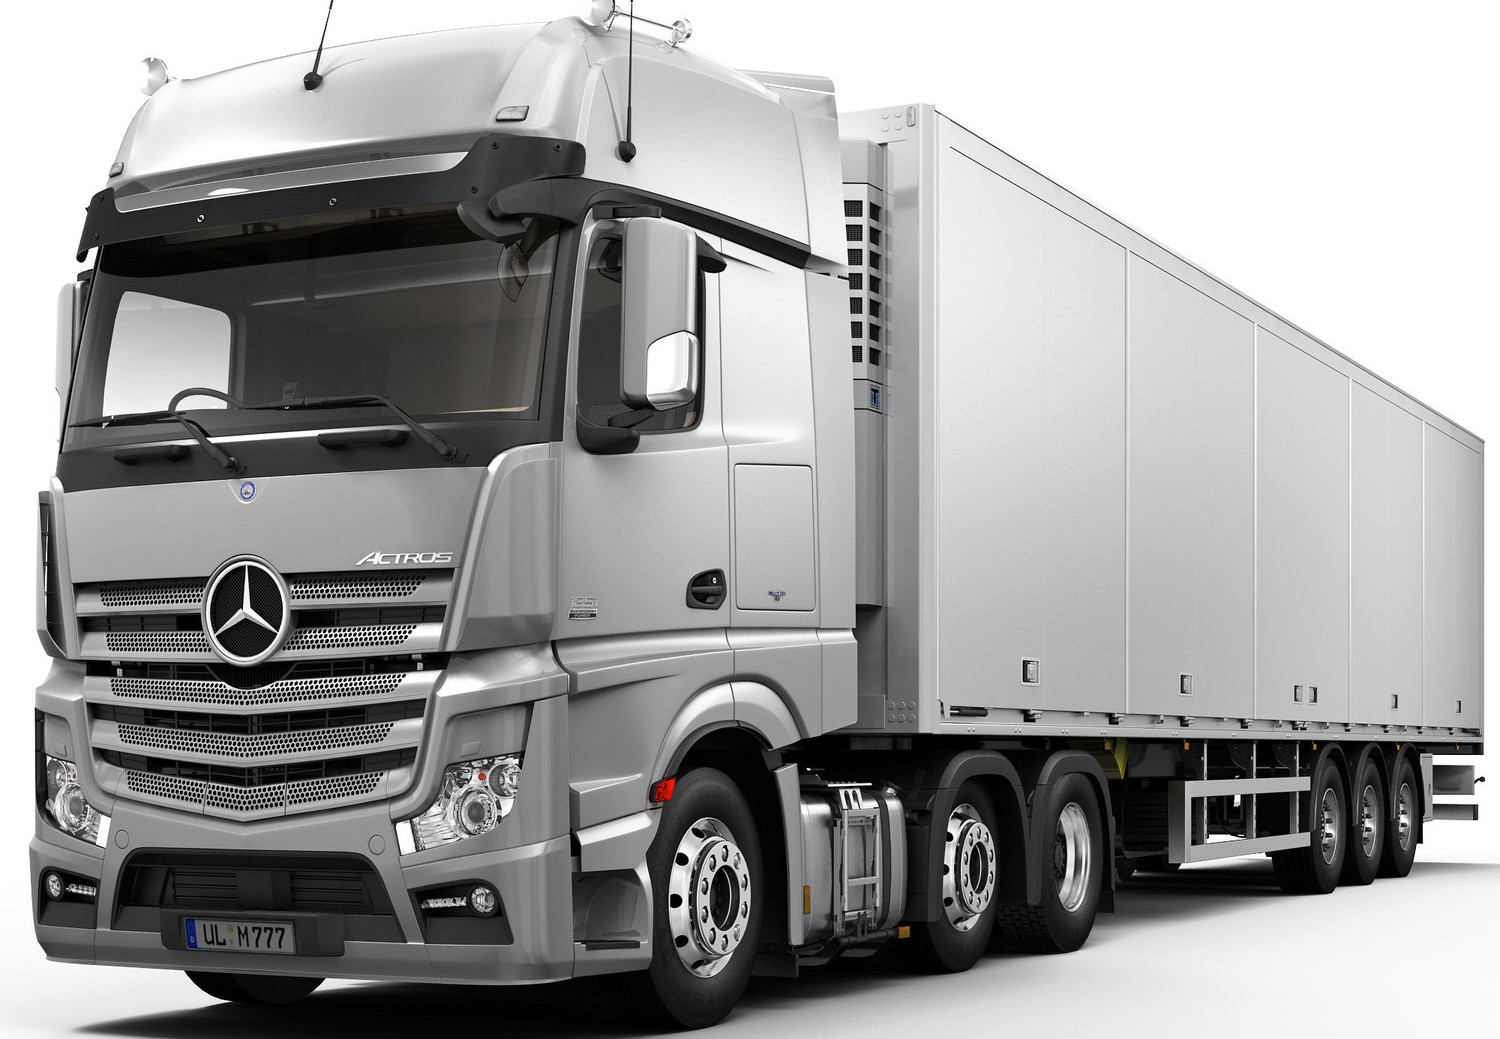 &nbsp;<span style="font-weight: bold;">MERCEDES ACTROS</span>